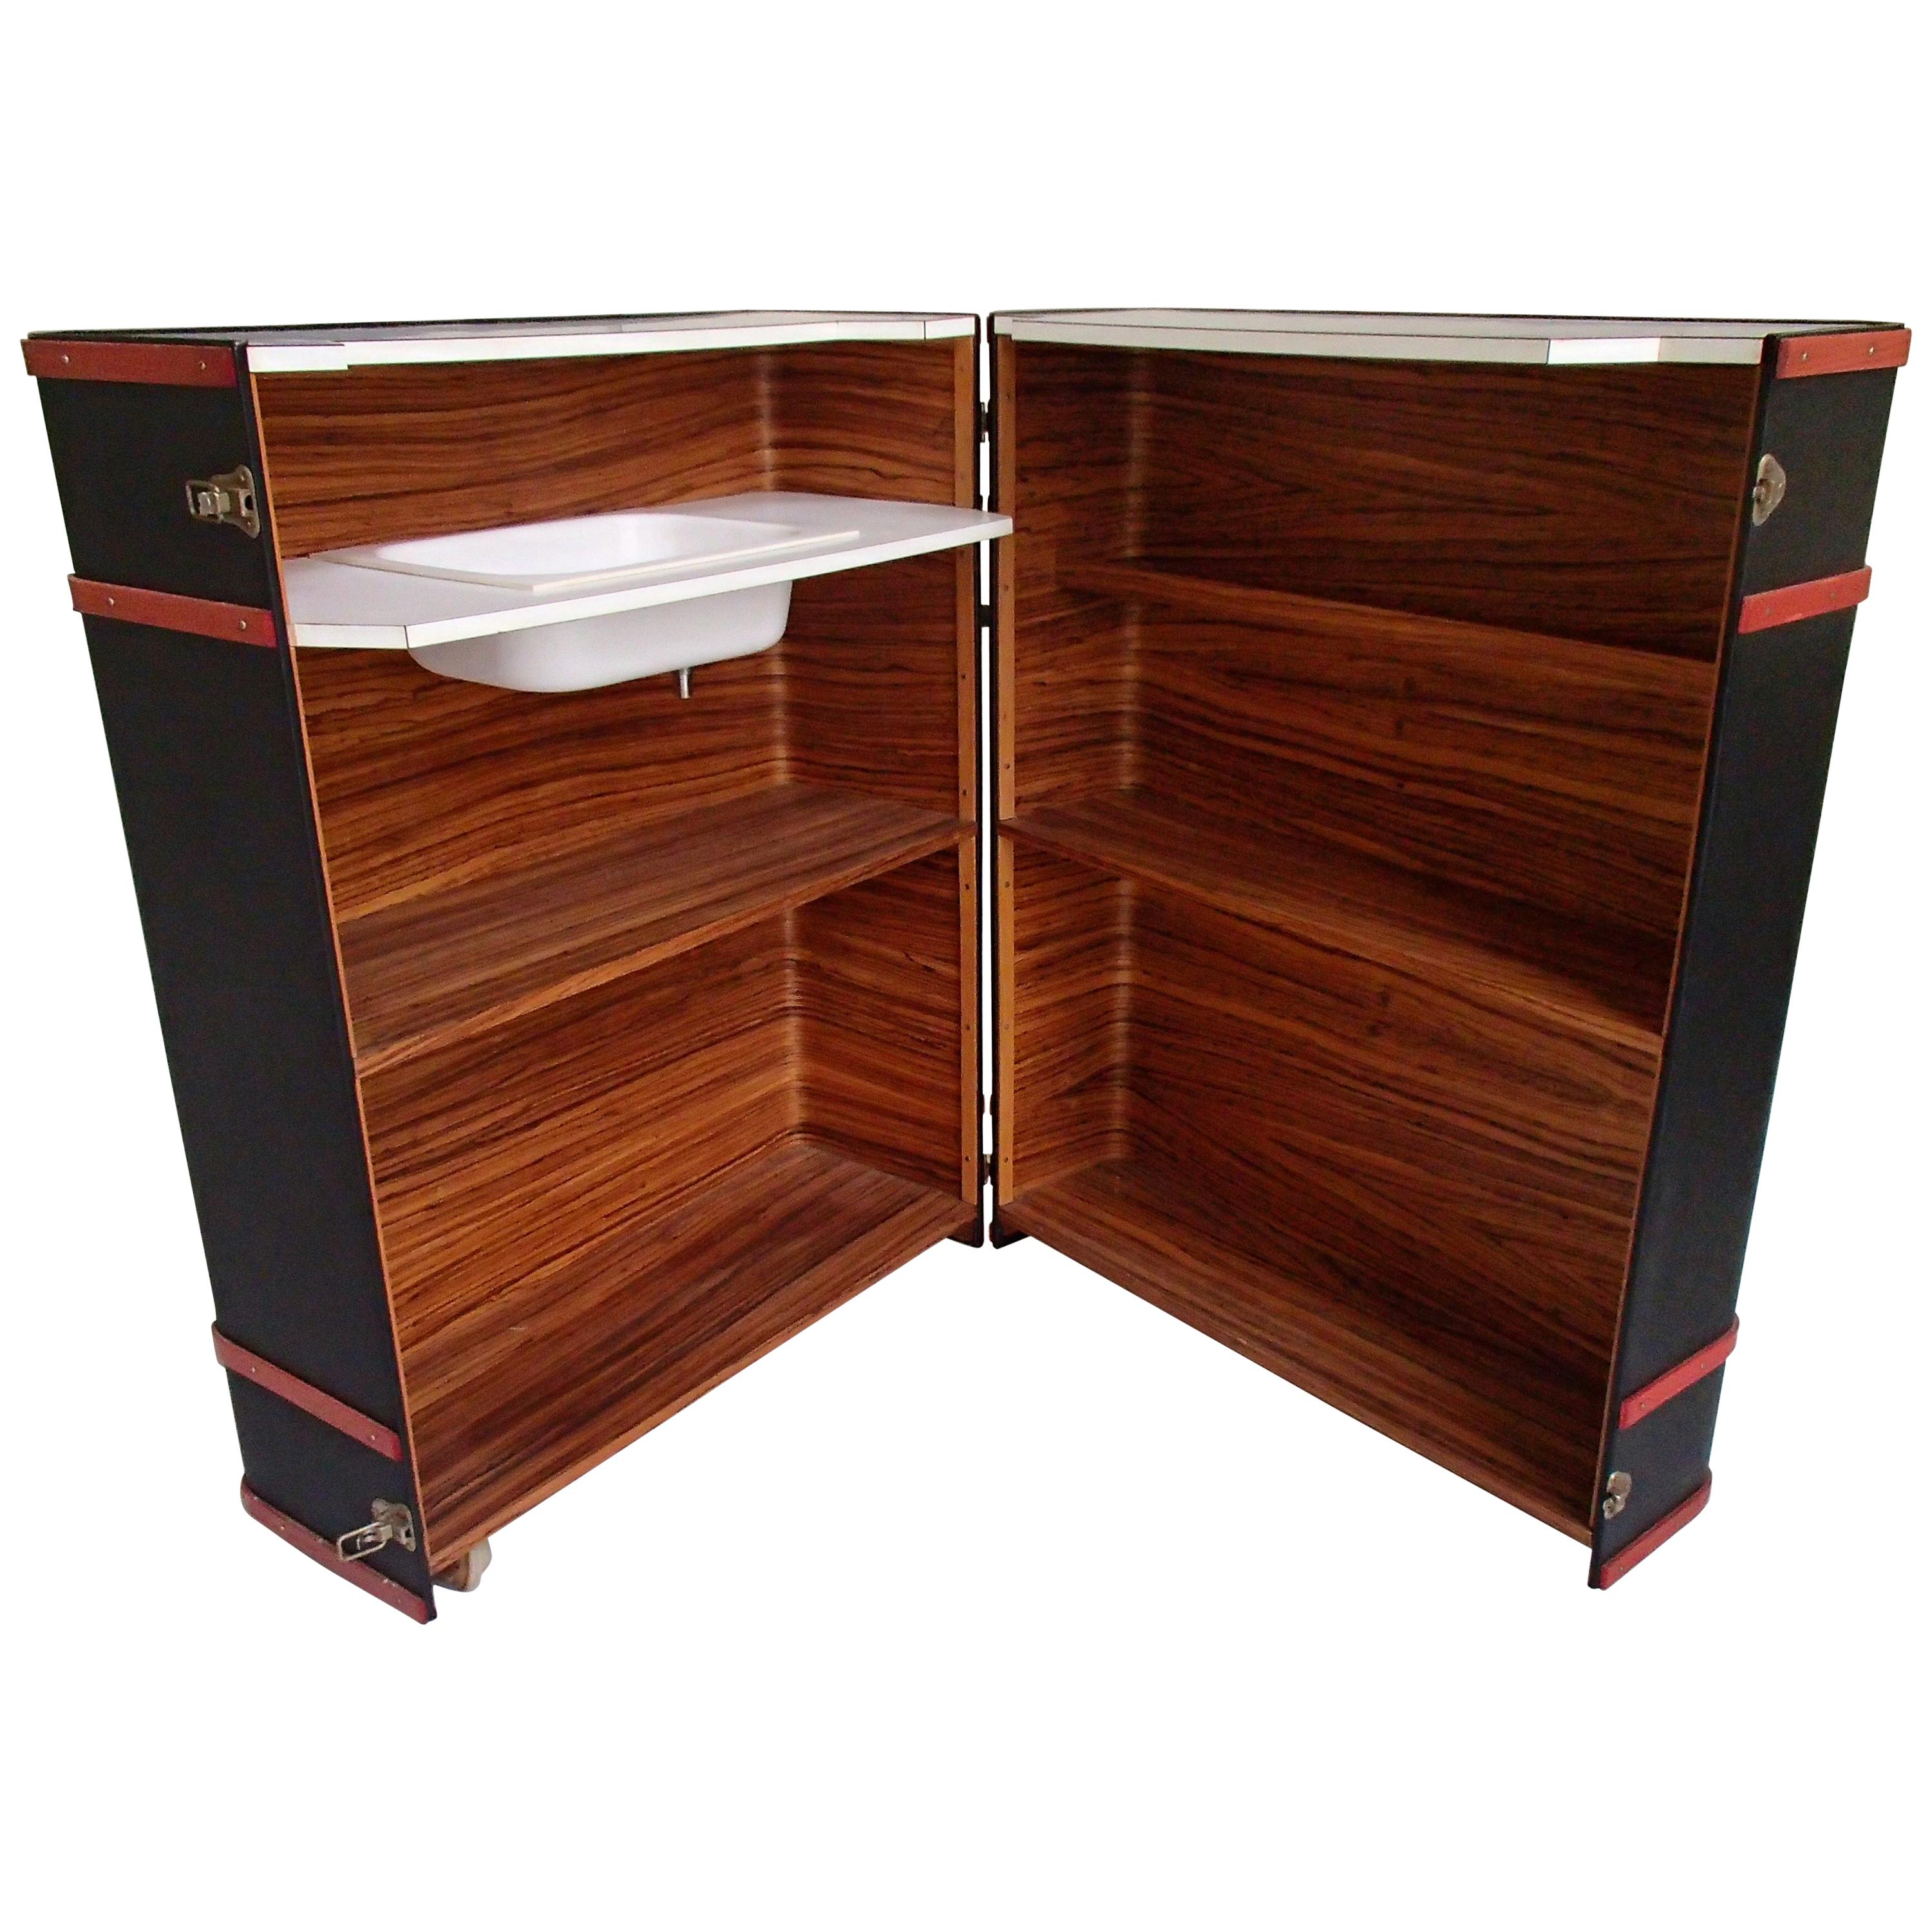 Modern Trunk Bar Black and Red with Sink Inside on Wheels For Sale